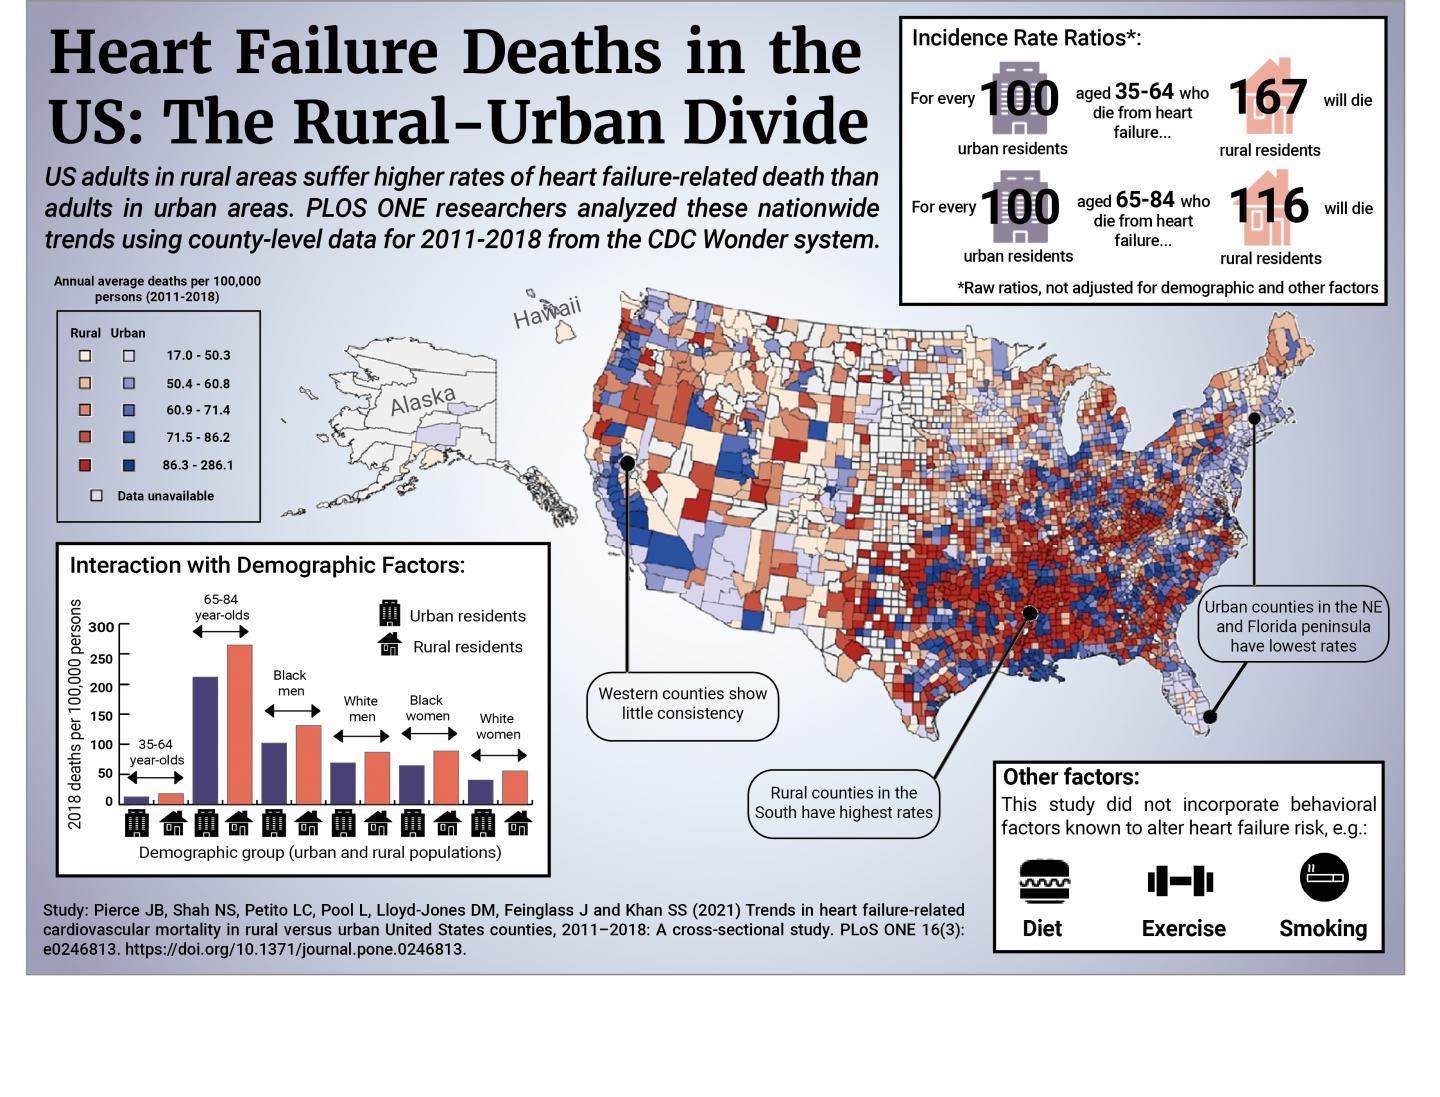 Heart failure-related death rates higher in rural versus urban U.S. counties